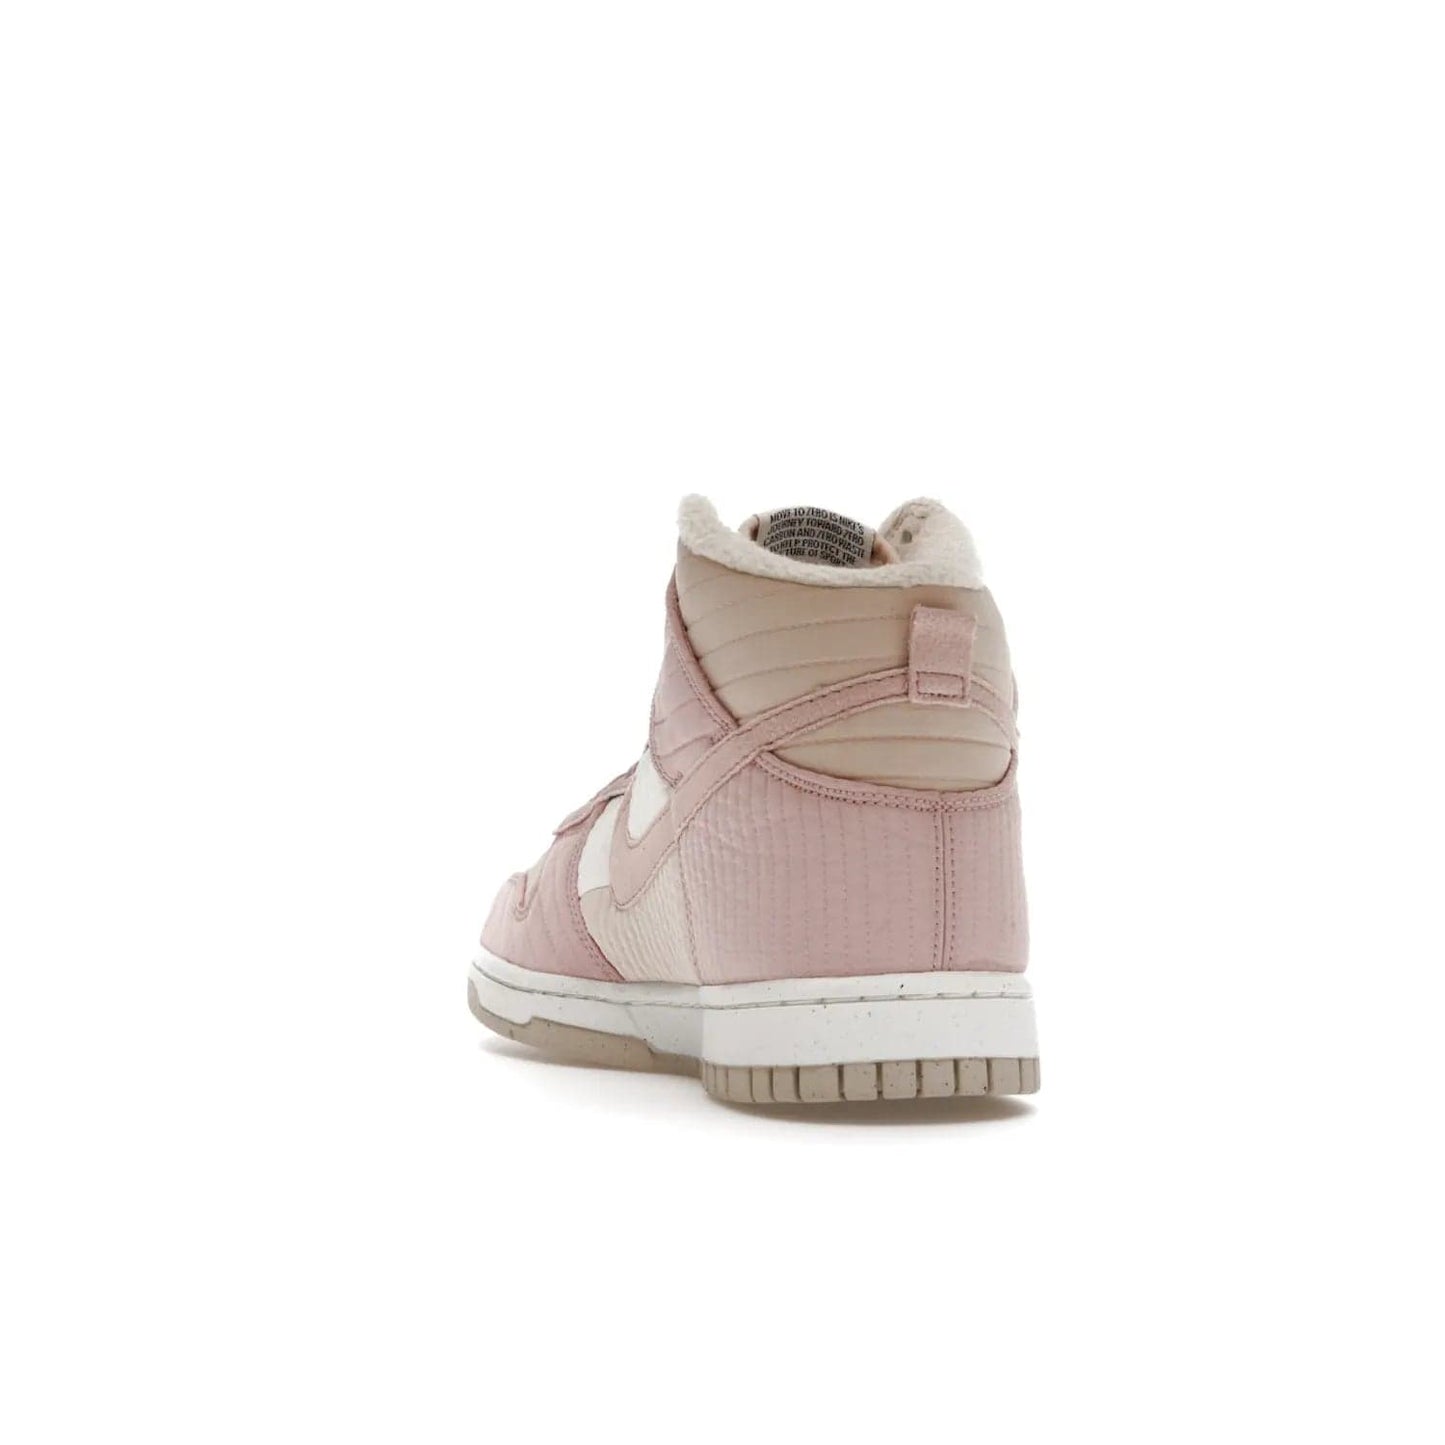 Nike Dunk High LX Next Nature Pink Oxford (Women's) - Image 26 - Only at www.BallersClubKickz.com - Cozy up in the Nike Dunk High LX Next Nature Pink Oxford for Women. Quilted upper, white midsole, soft fleece interior provide warmth and comfort for cold winter nights.